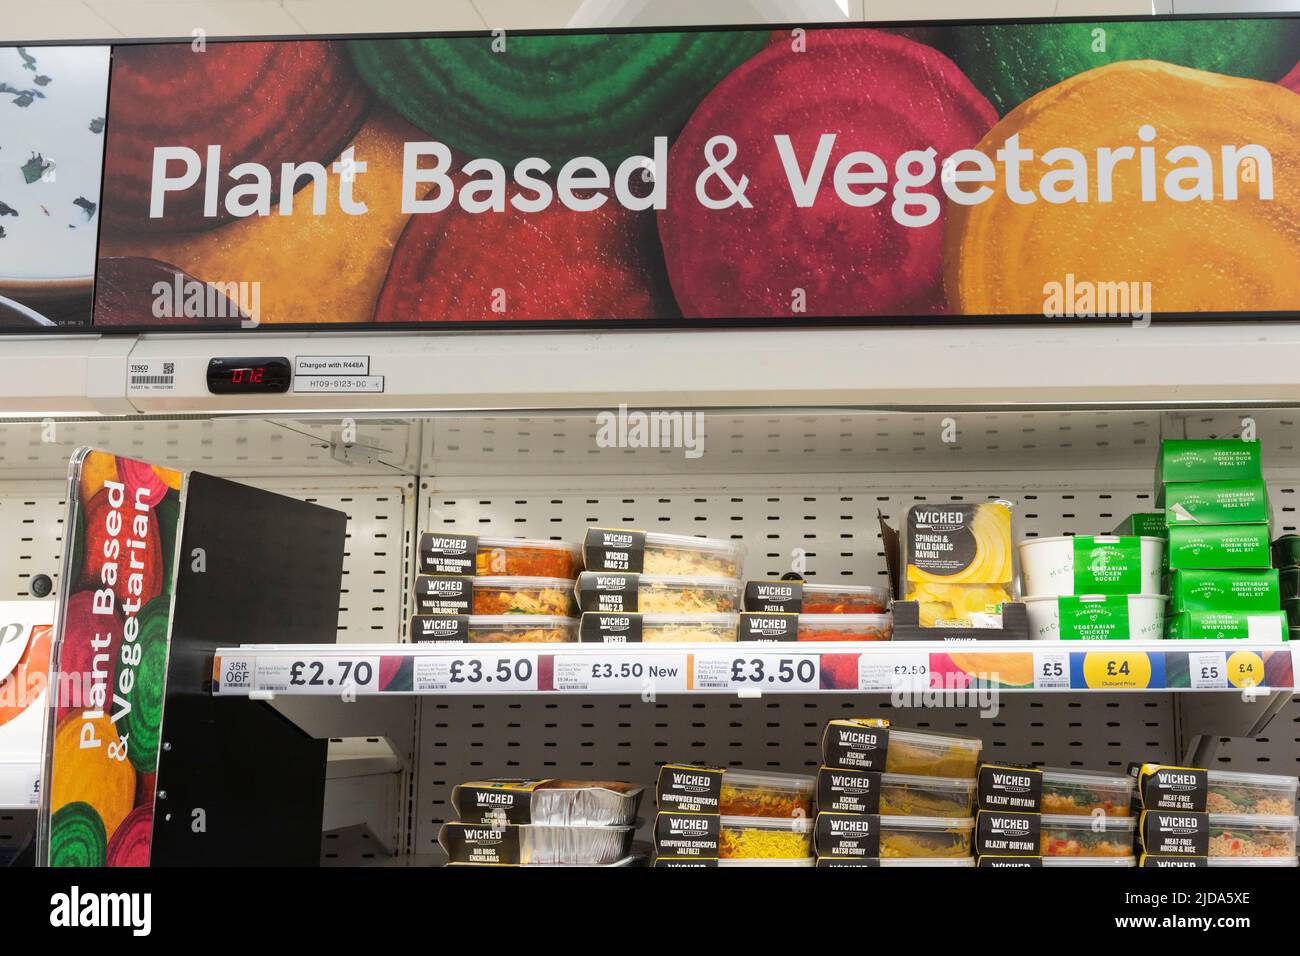 Plant based and vegetarian sign and food products on supermarket shelves in Tesco, UK Stock Photo